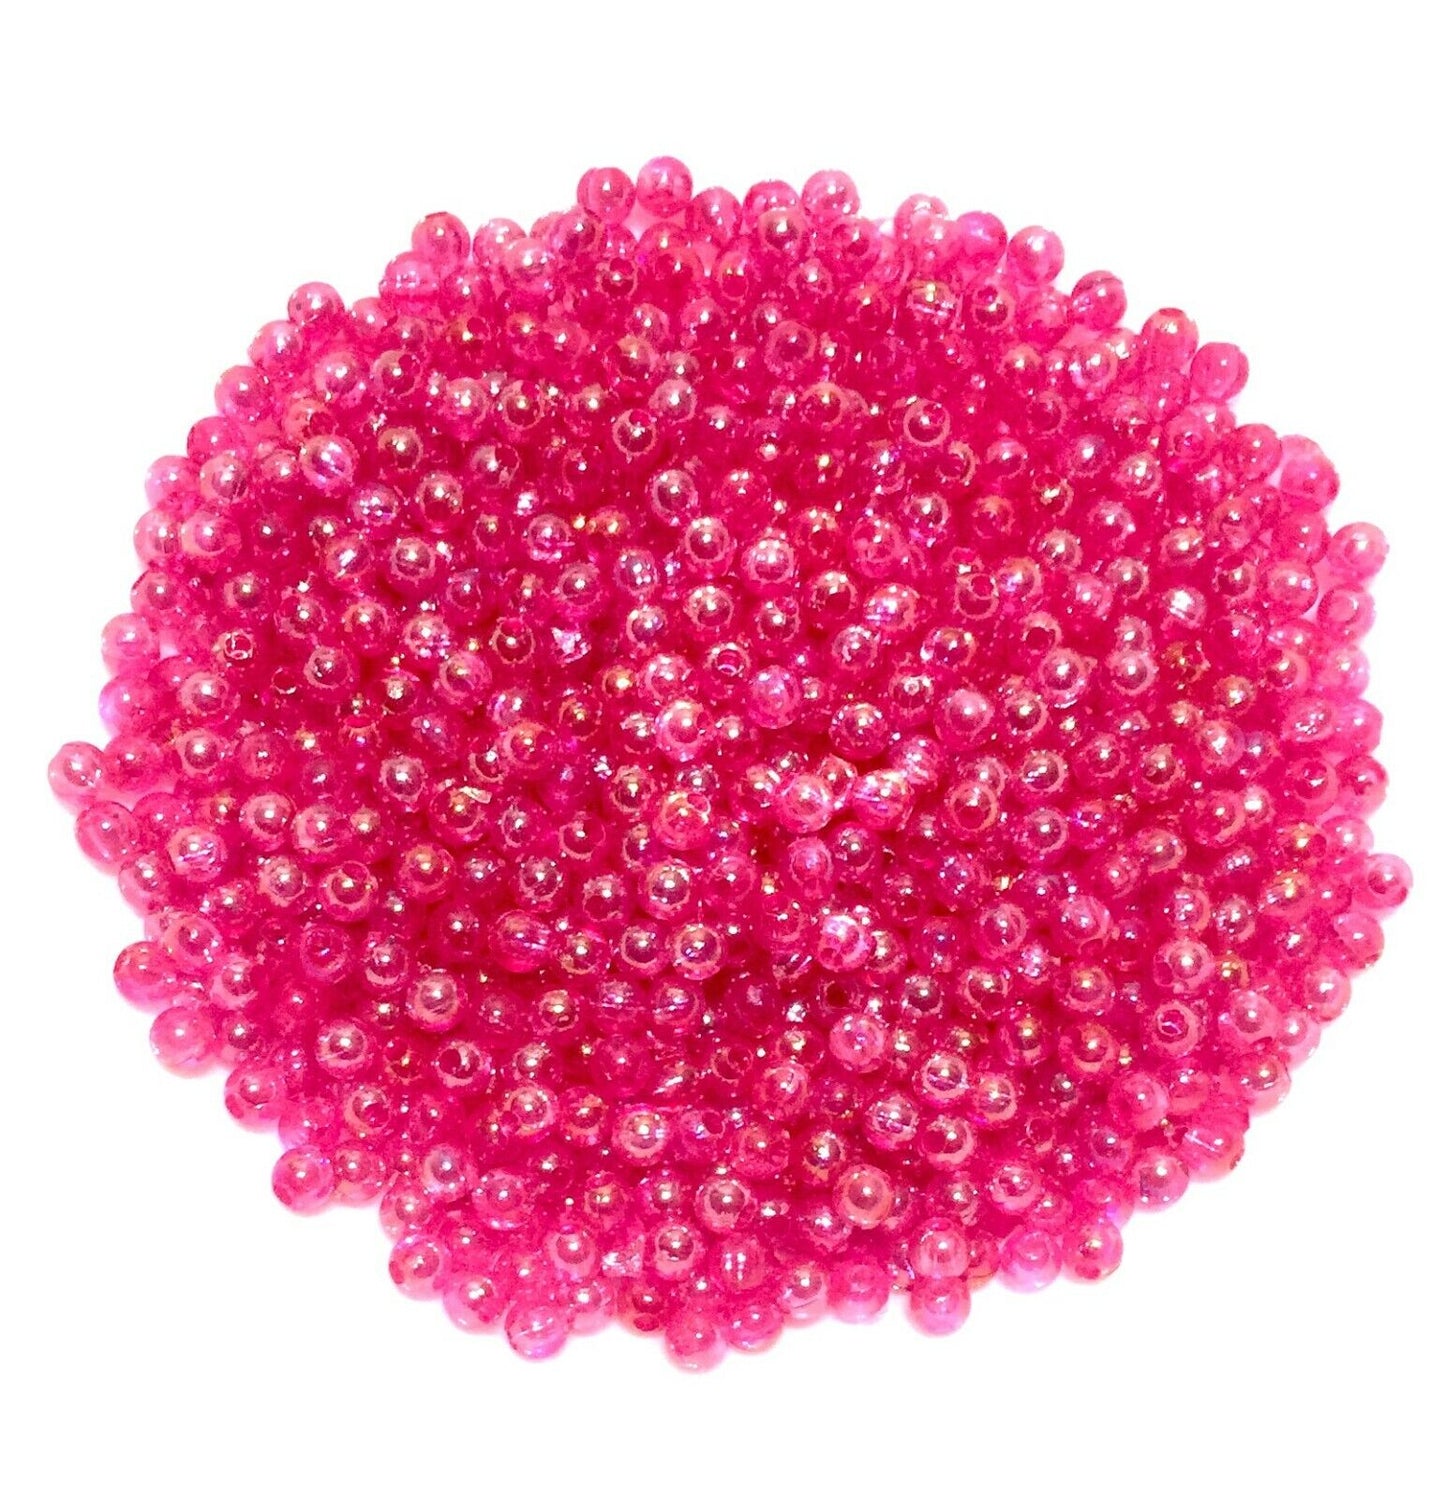 1000 pcs Small Acrylic 4mm Spacer Beads - Choose Iridescent, Pearl or Opaque